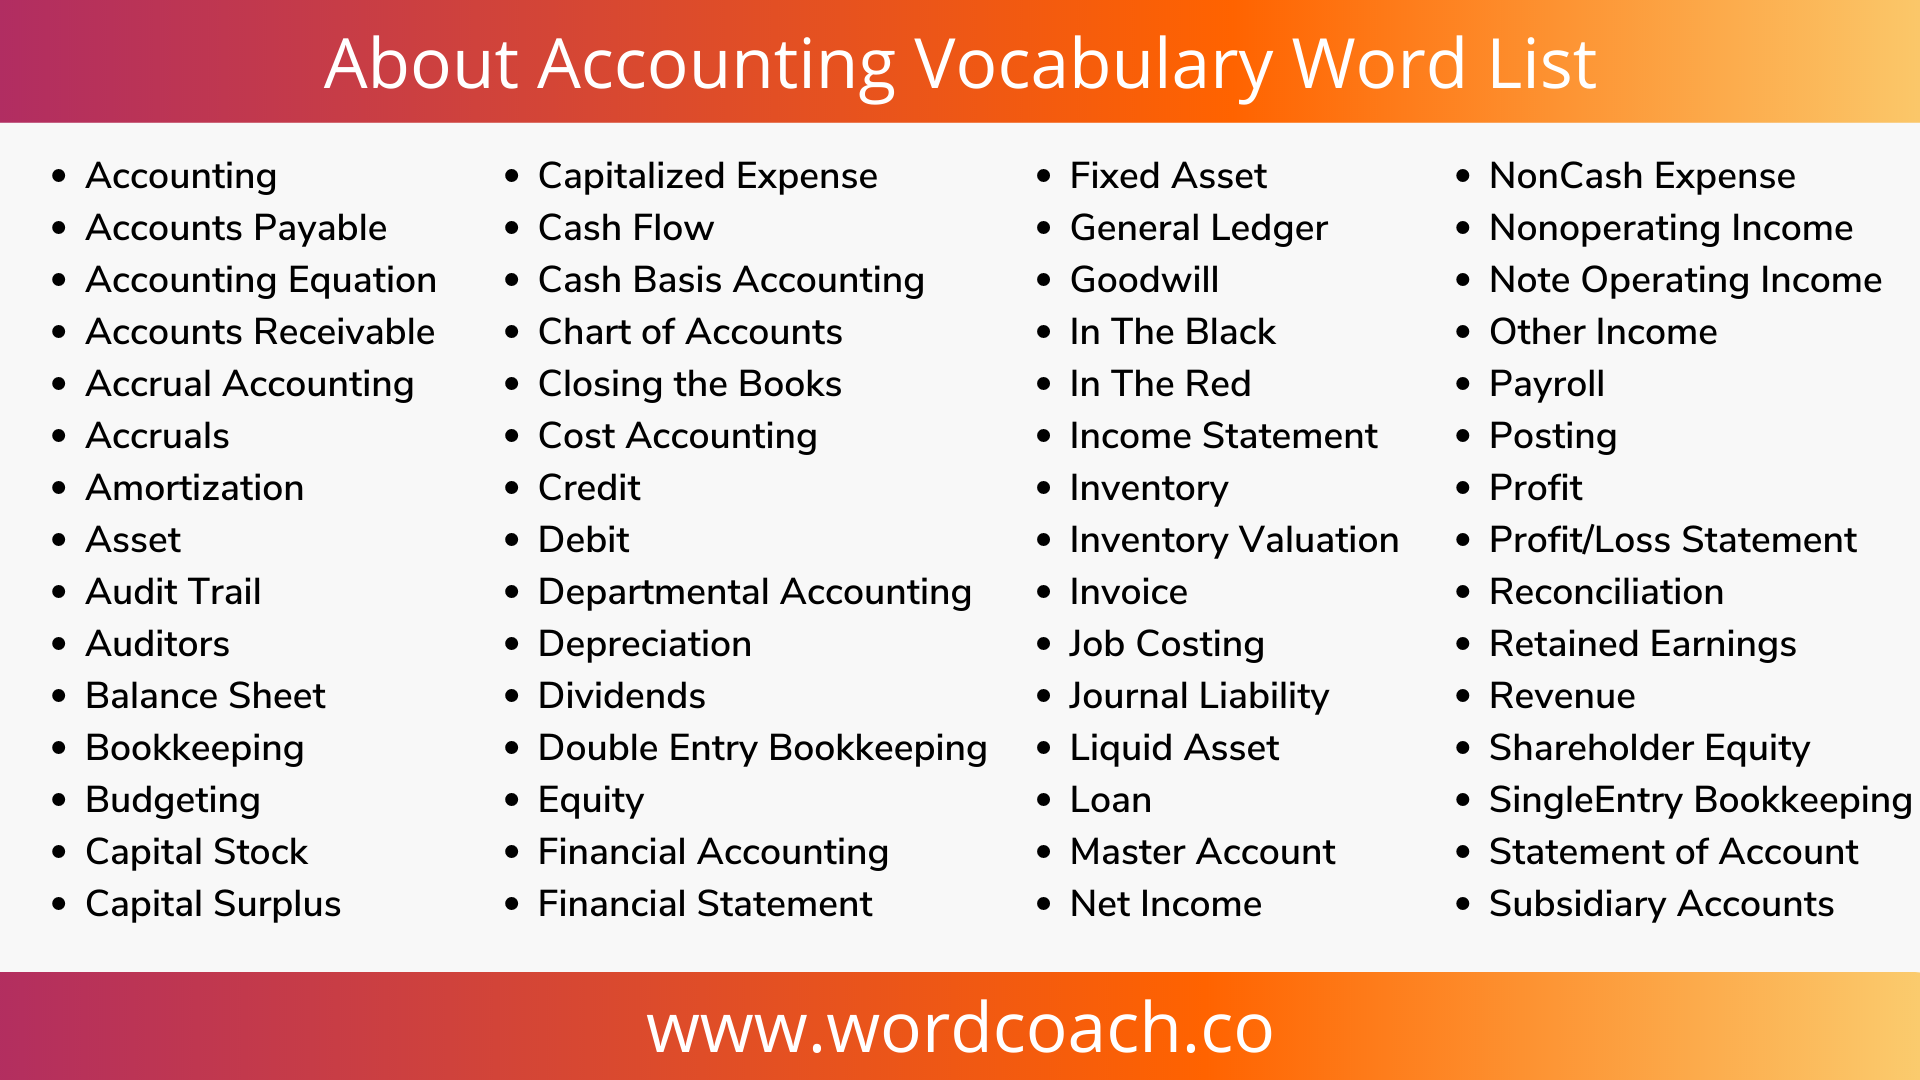 About Accounting Vocabulary Word List